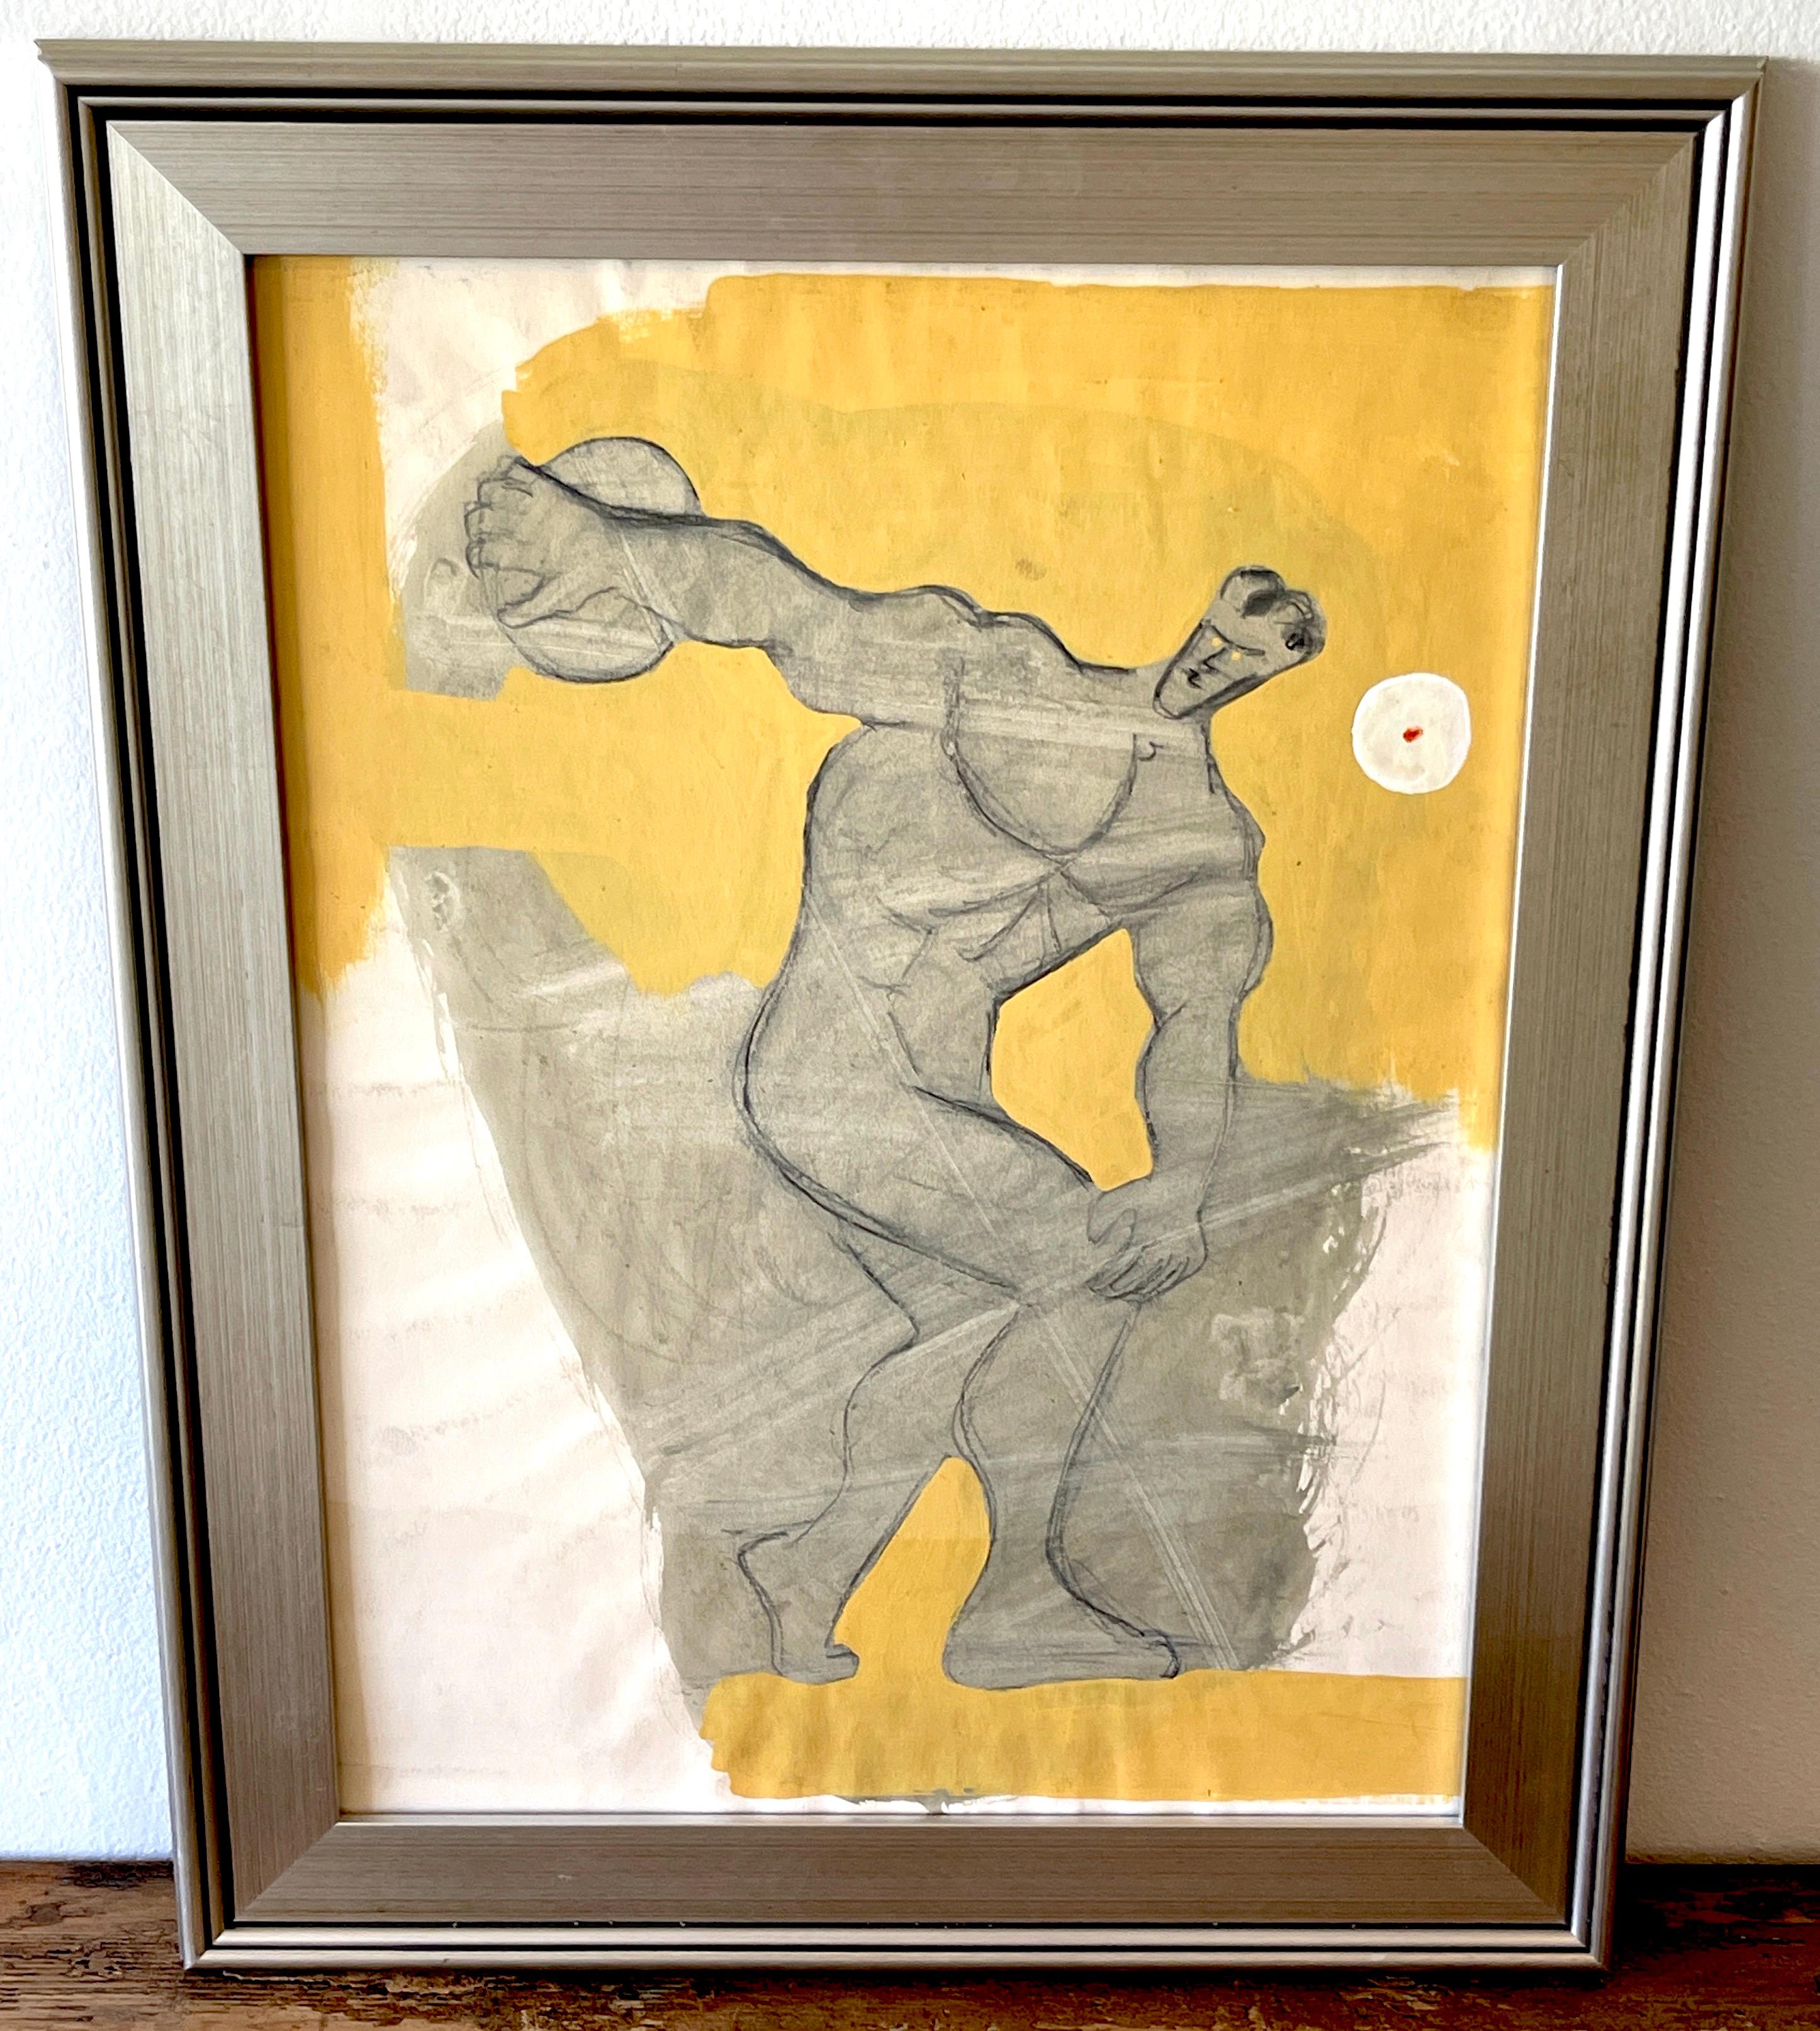 'The Discobolus' or 'Discus Thrower' Oil/Mixed Media on Paper, 1960s by Douglas D. Peden 
USA, 1933-2015, Listed Modern Painter, Mathematician & Scholar
Oil/mixed media on paper 
Signed in pencil on back 'Douglas Peden' 
This work measures